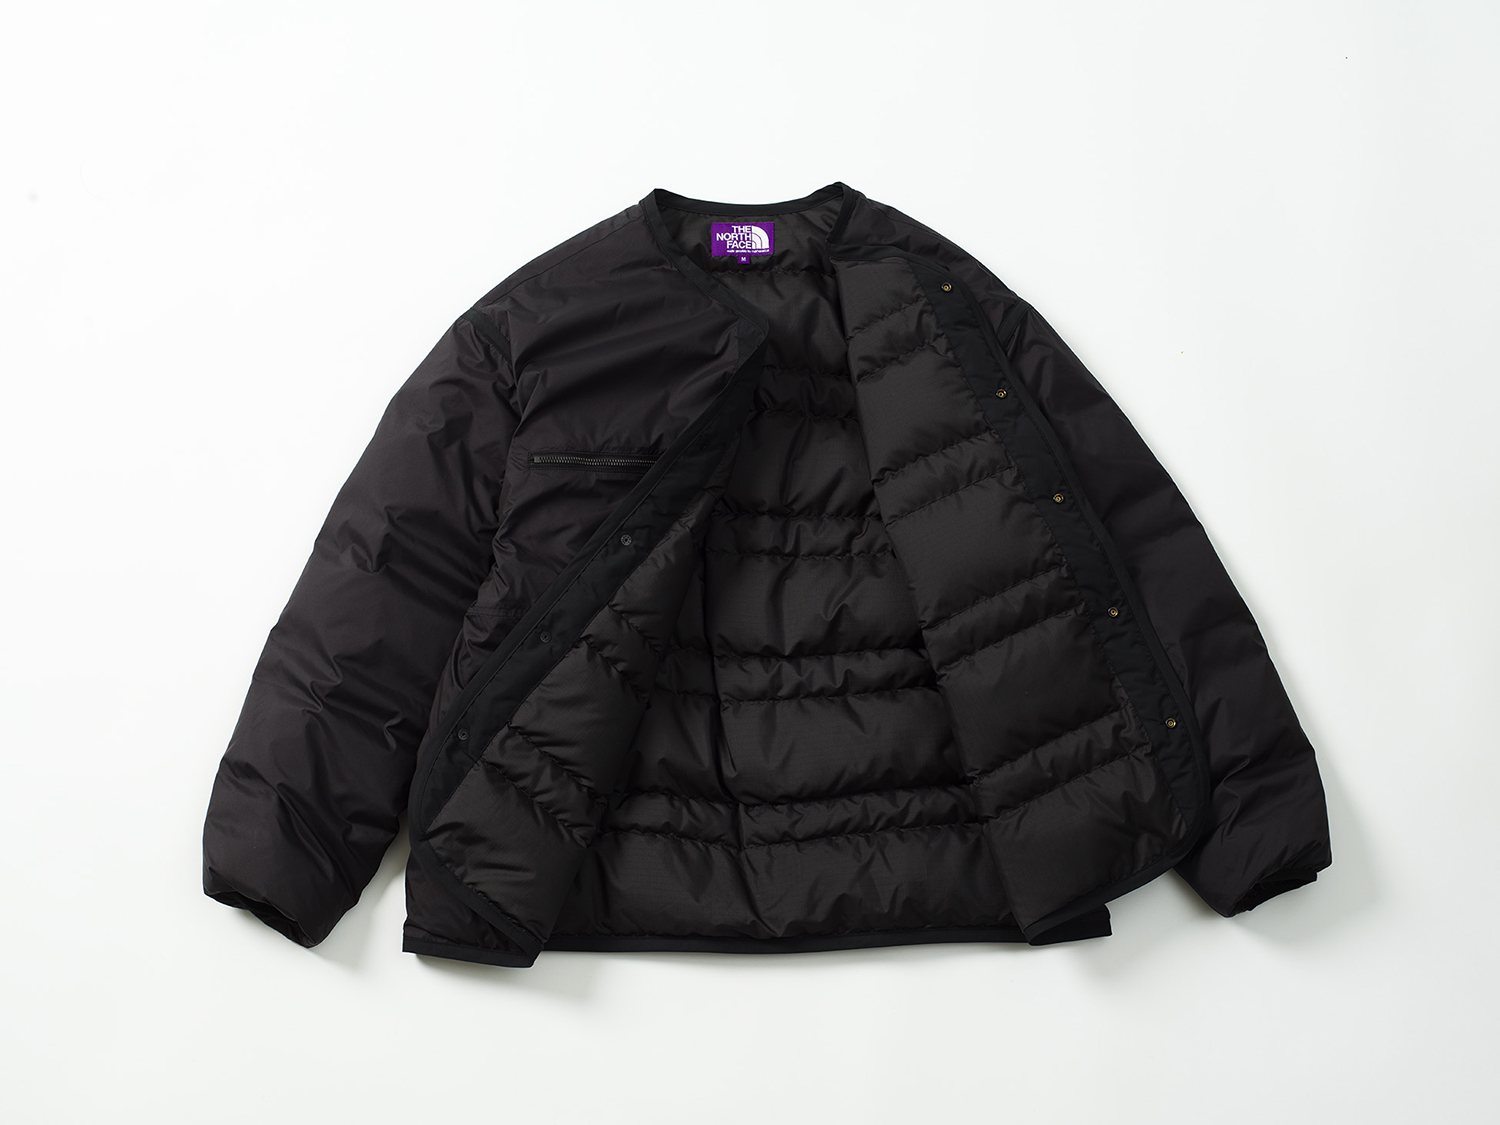 THE NORTH FACE PURPLE LABEL for RHC Ron Hermanの新作は 